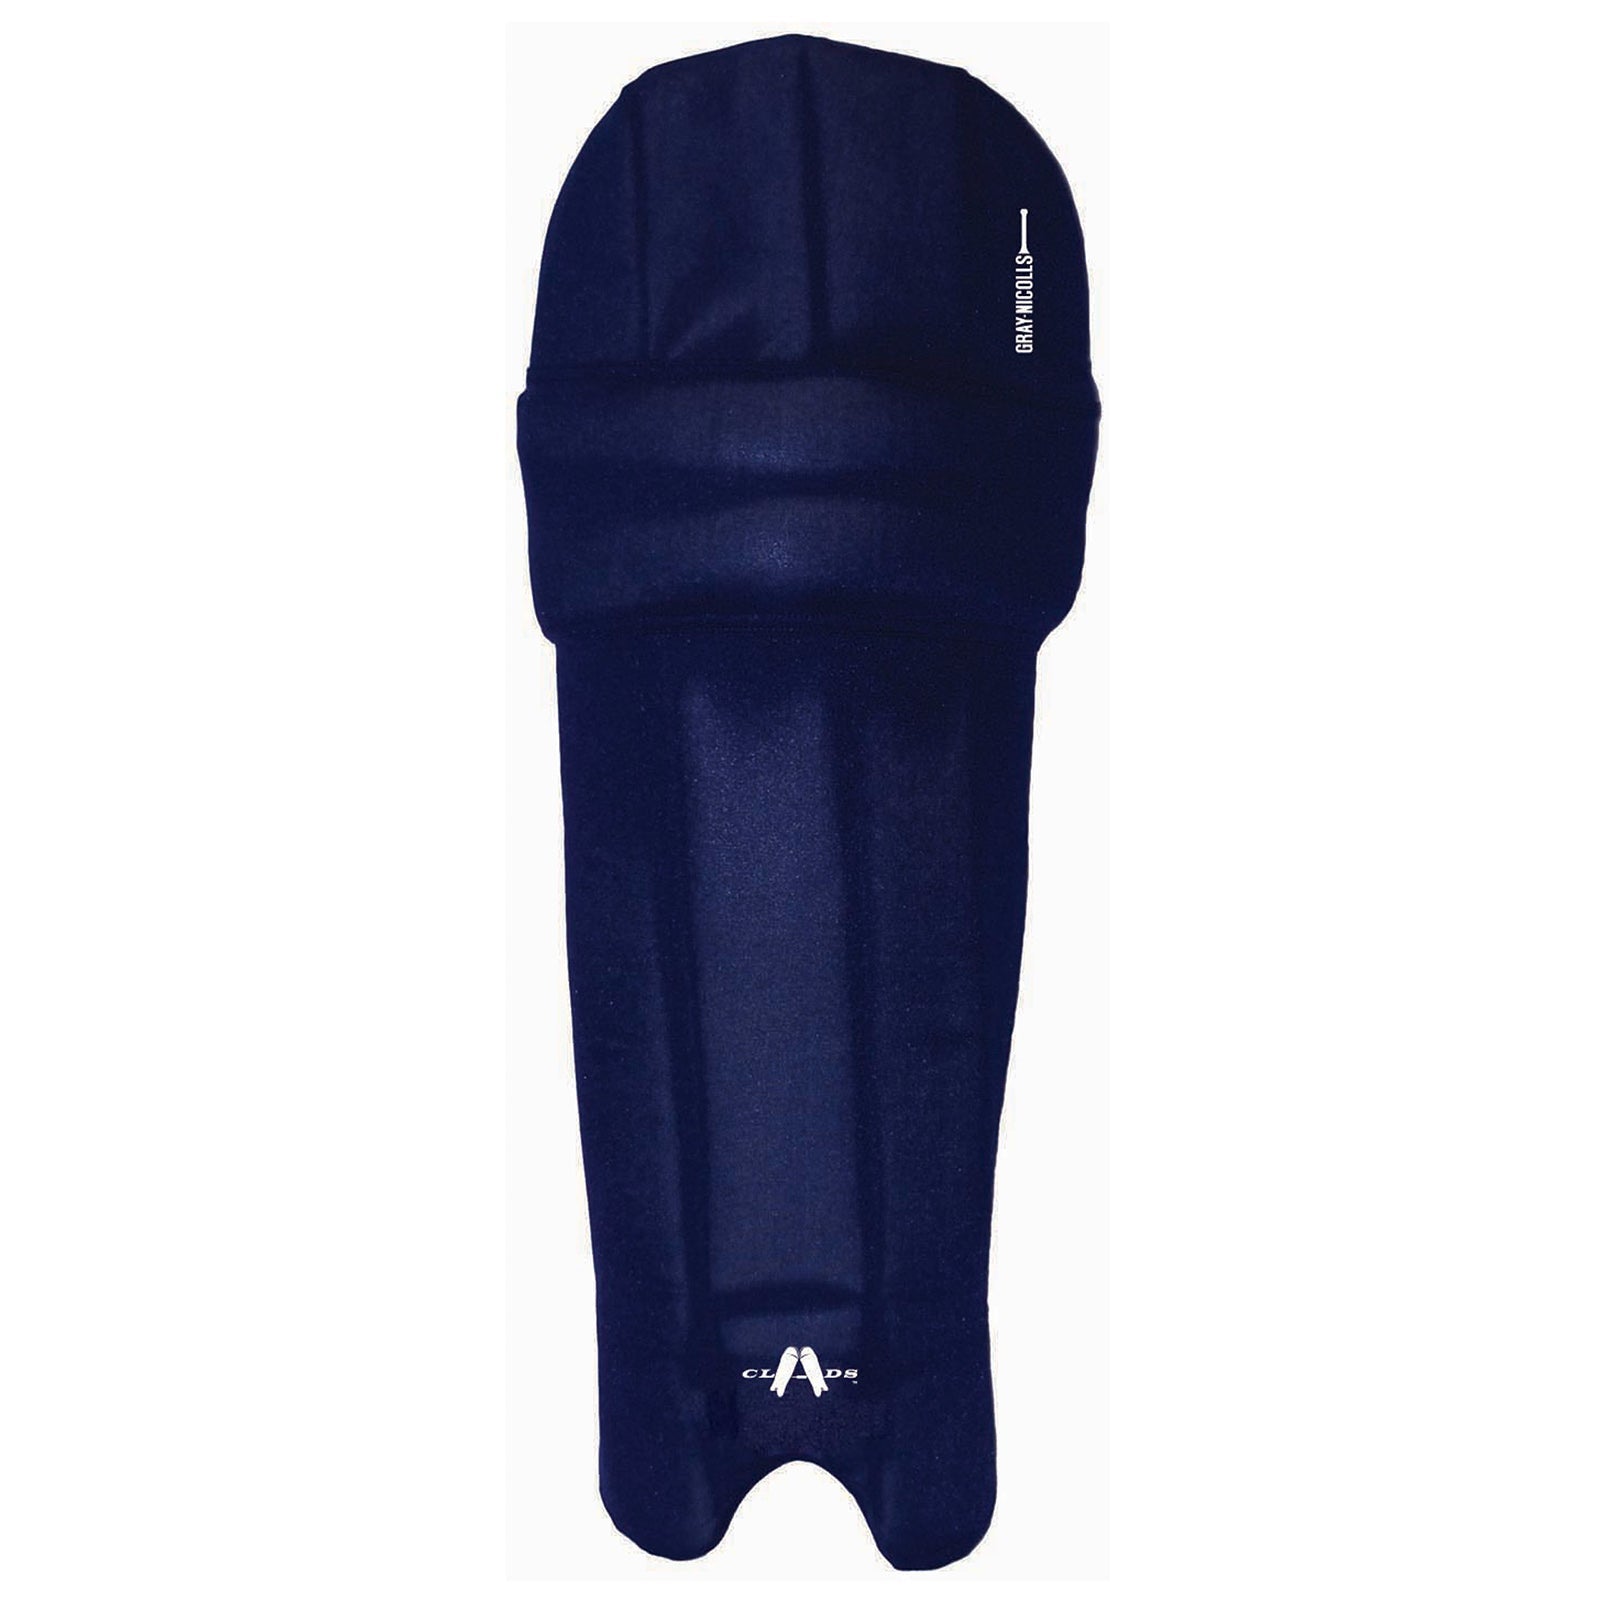 Gray Nicolls Clads Batting Pads Cover - Youth